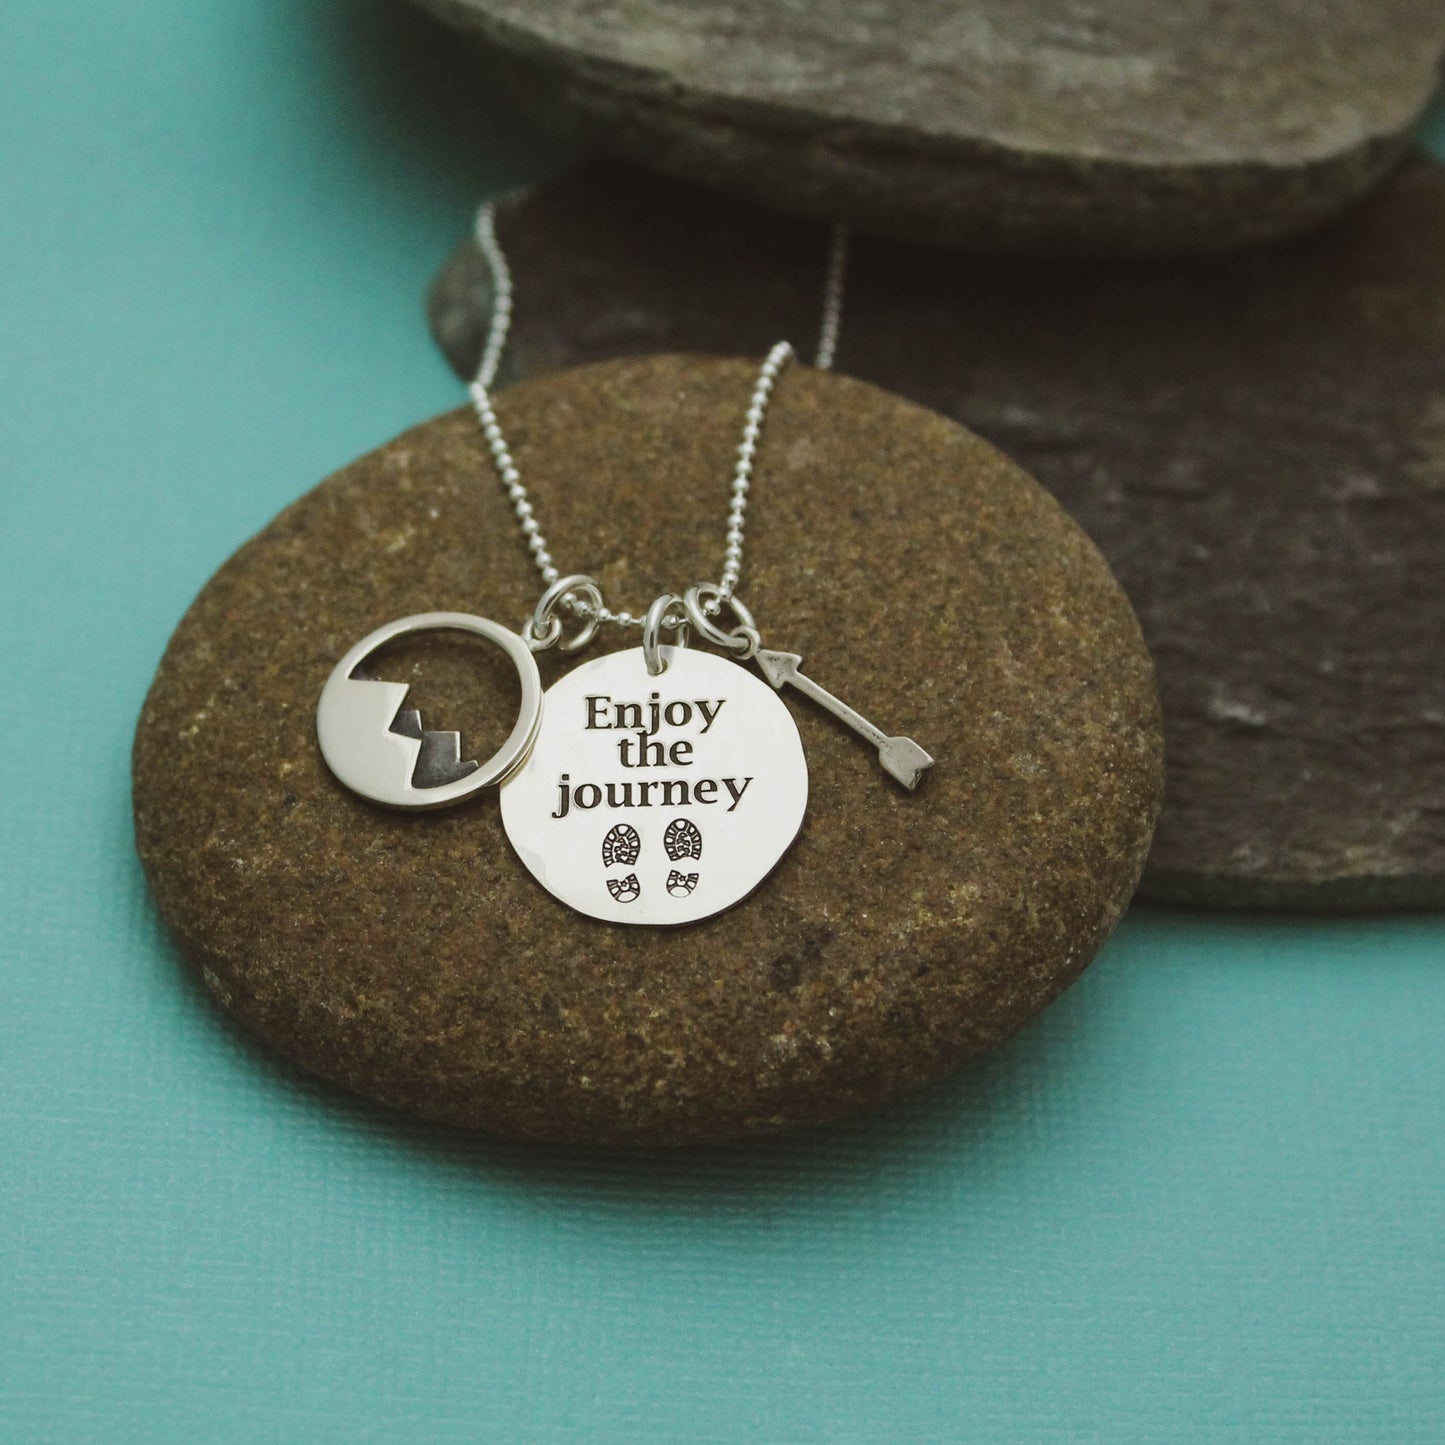 Enjoy the Journey Necklace, Hiking Necklace, Mountain Jewelry, Graduation Gift, Hand Stamped Necklace, Adventure Jewelry, Hiker Necklace